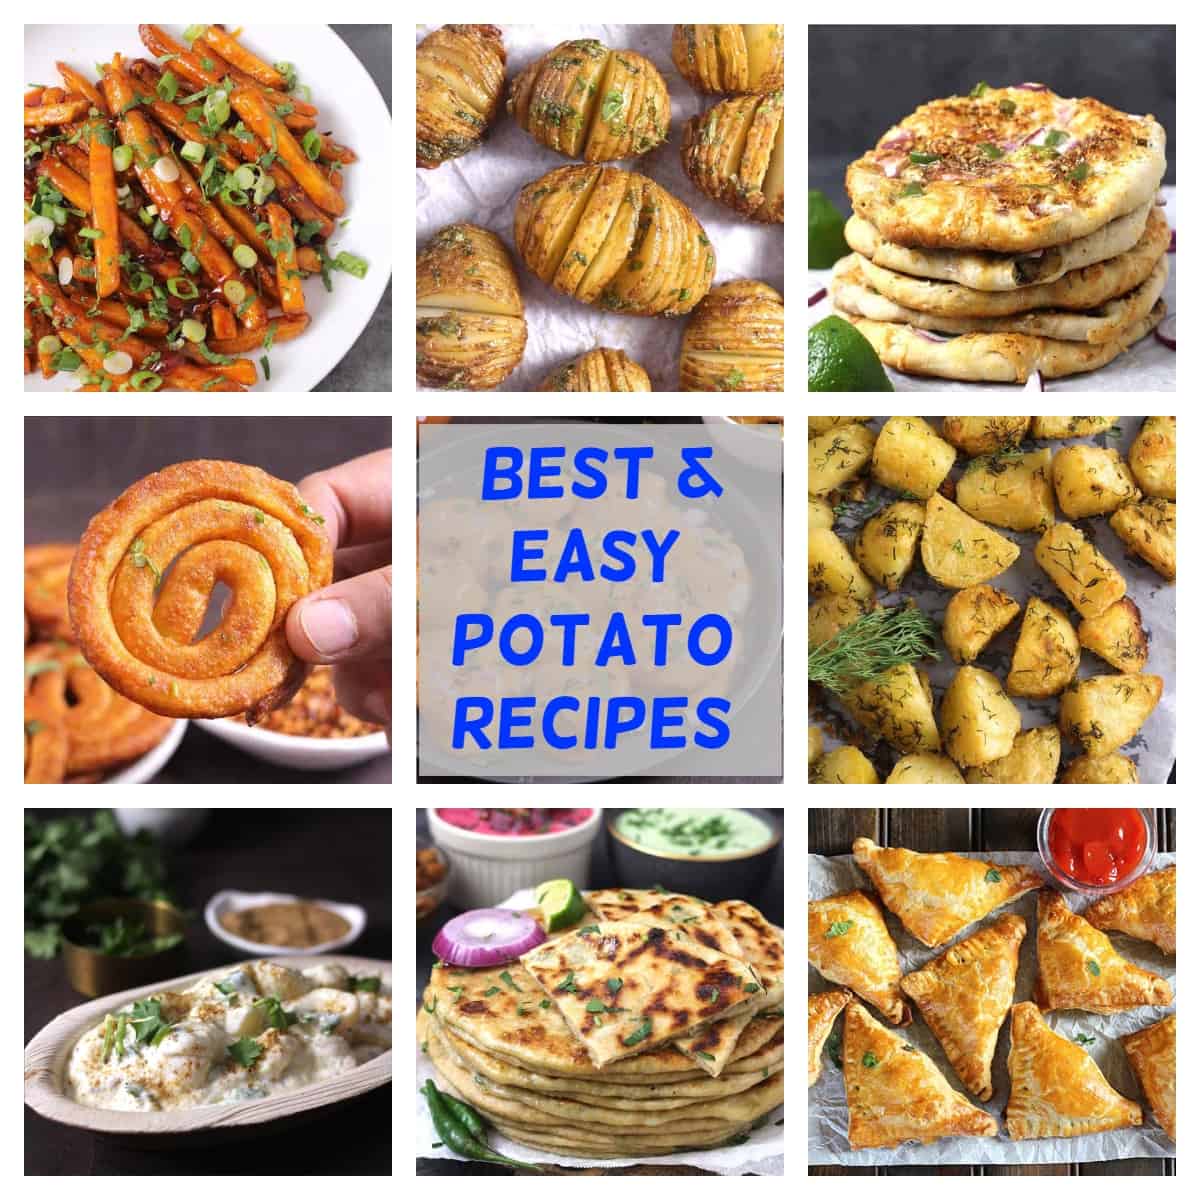 best potato recipes, easy simple ideas to cook potatoes for dinner, side dishes, main dish, snacks